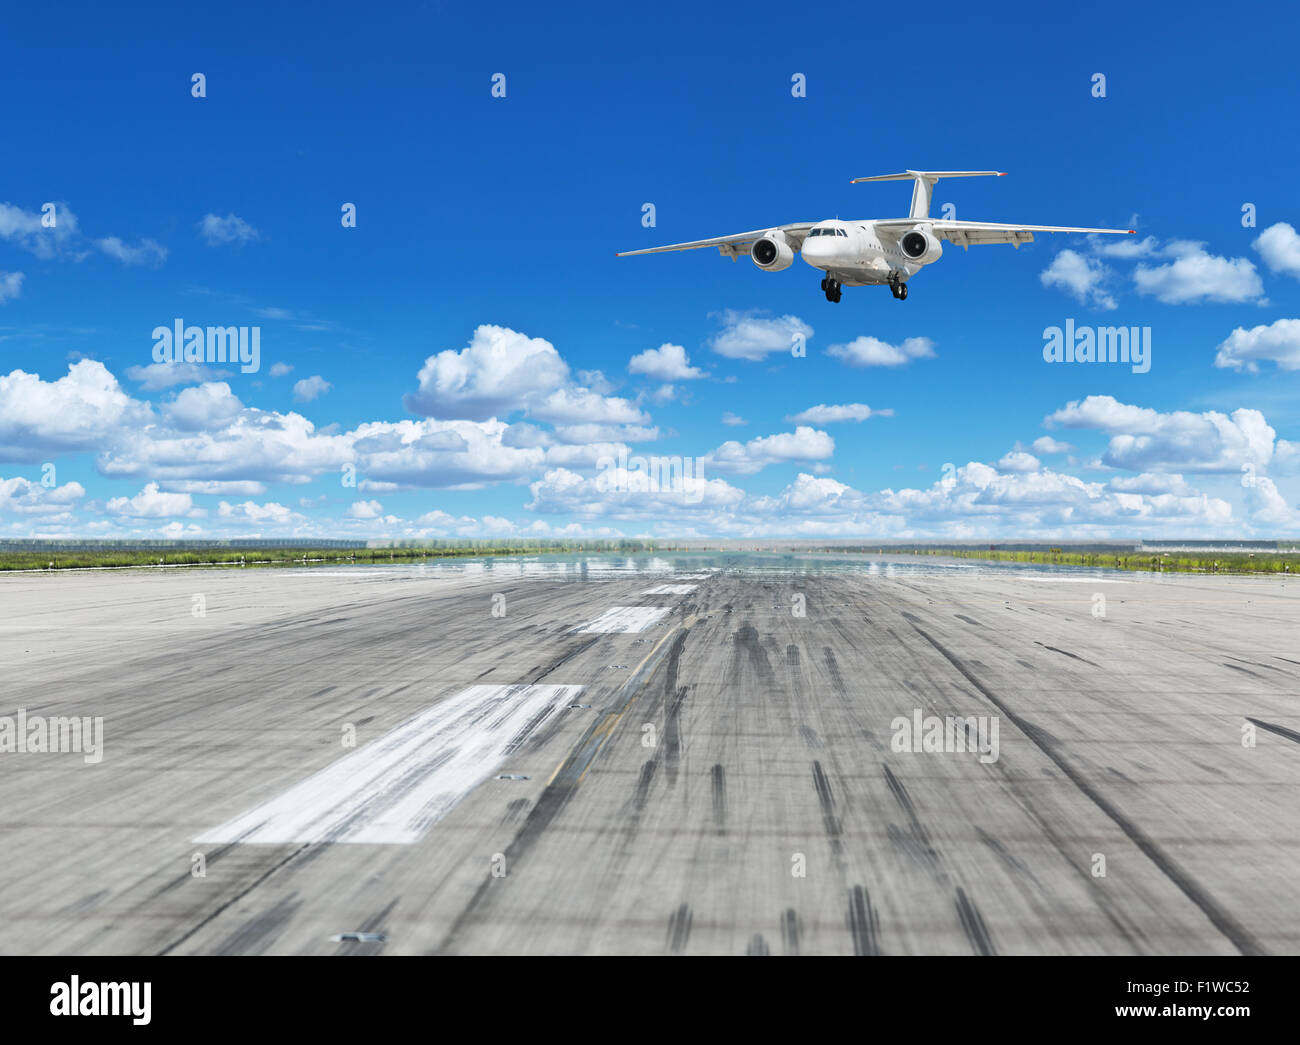 Airplane landing on runaway in the airport. Stock Photo